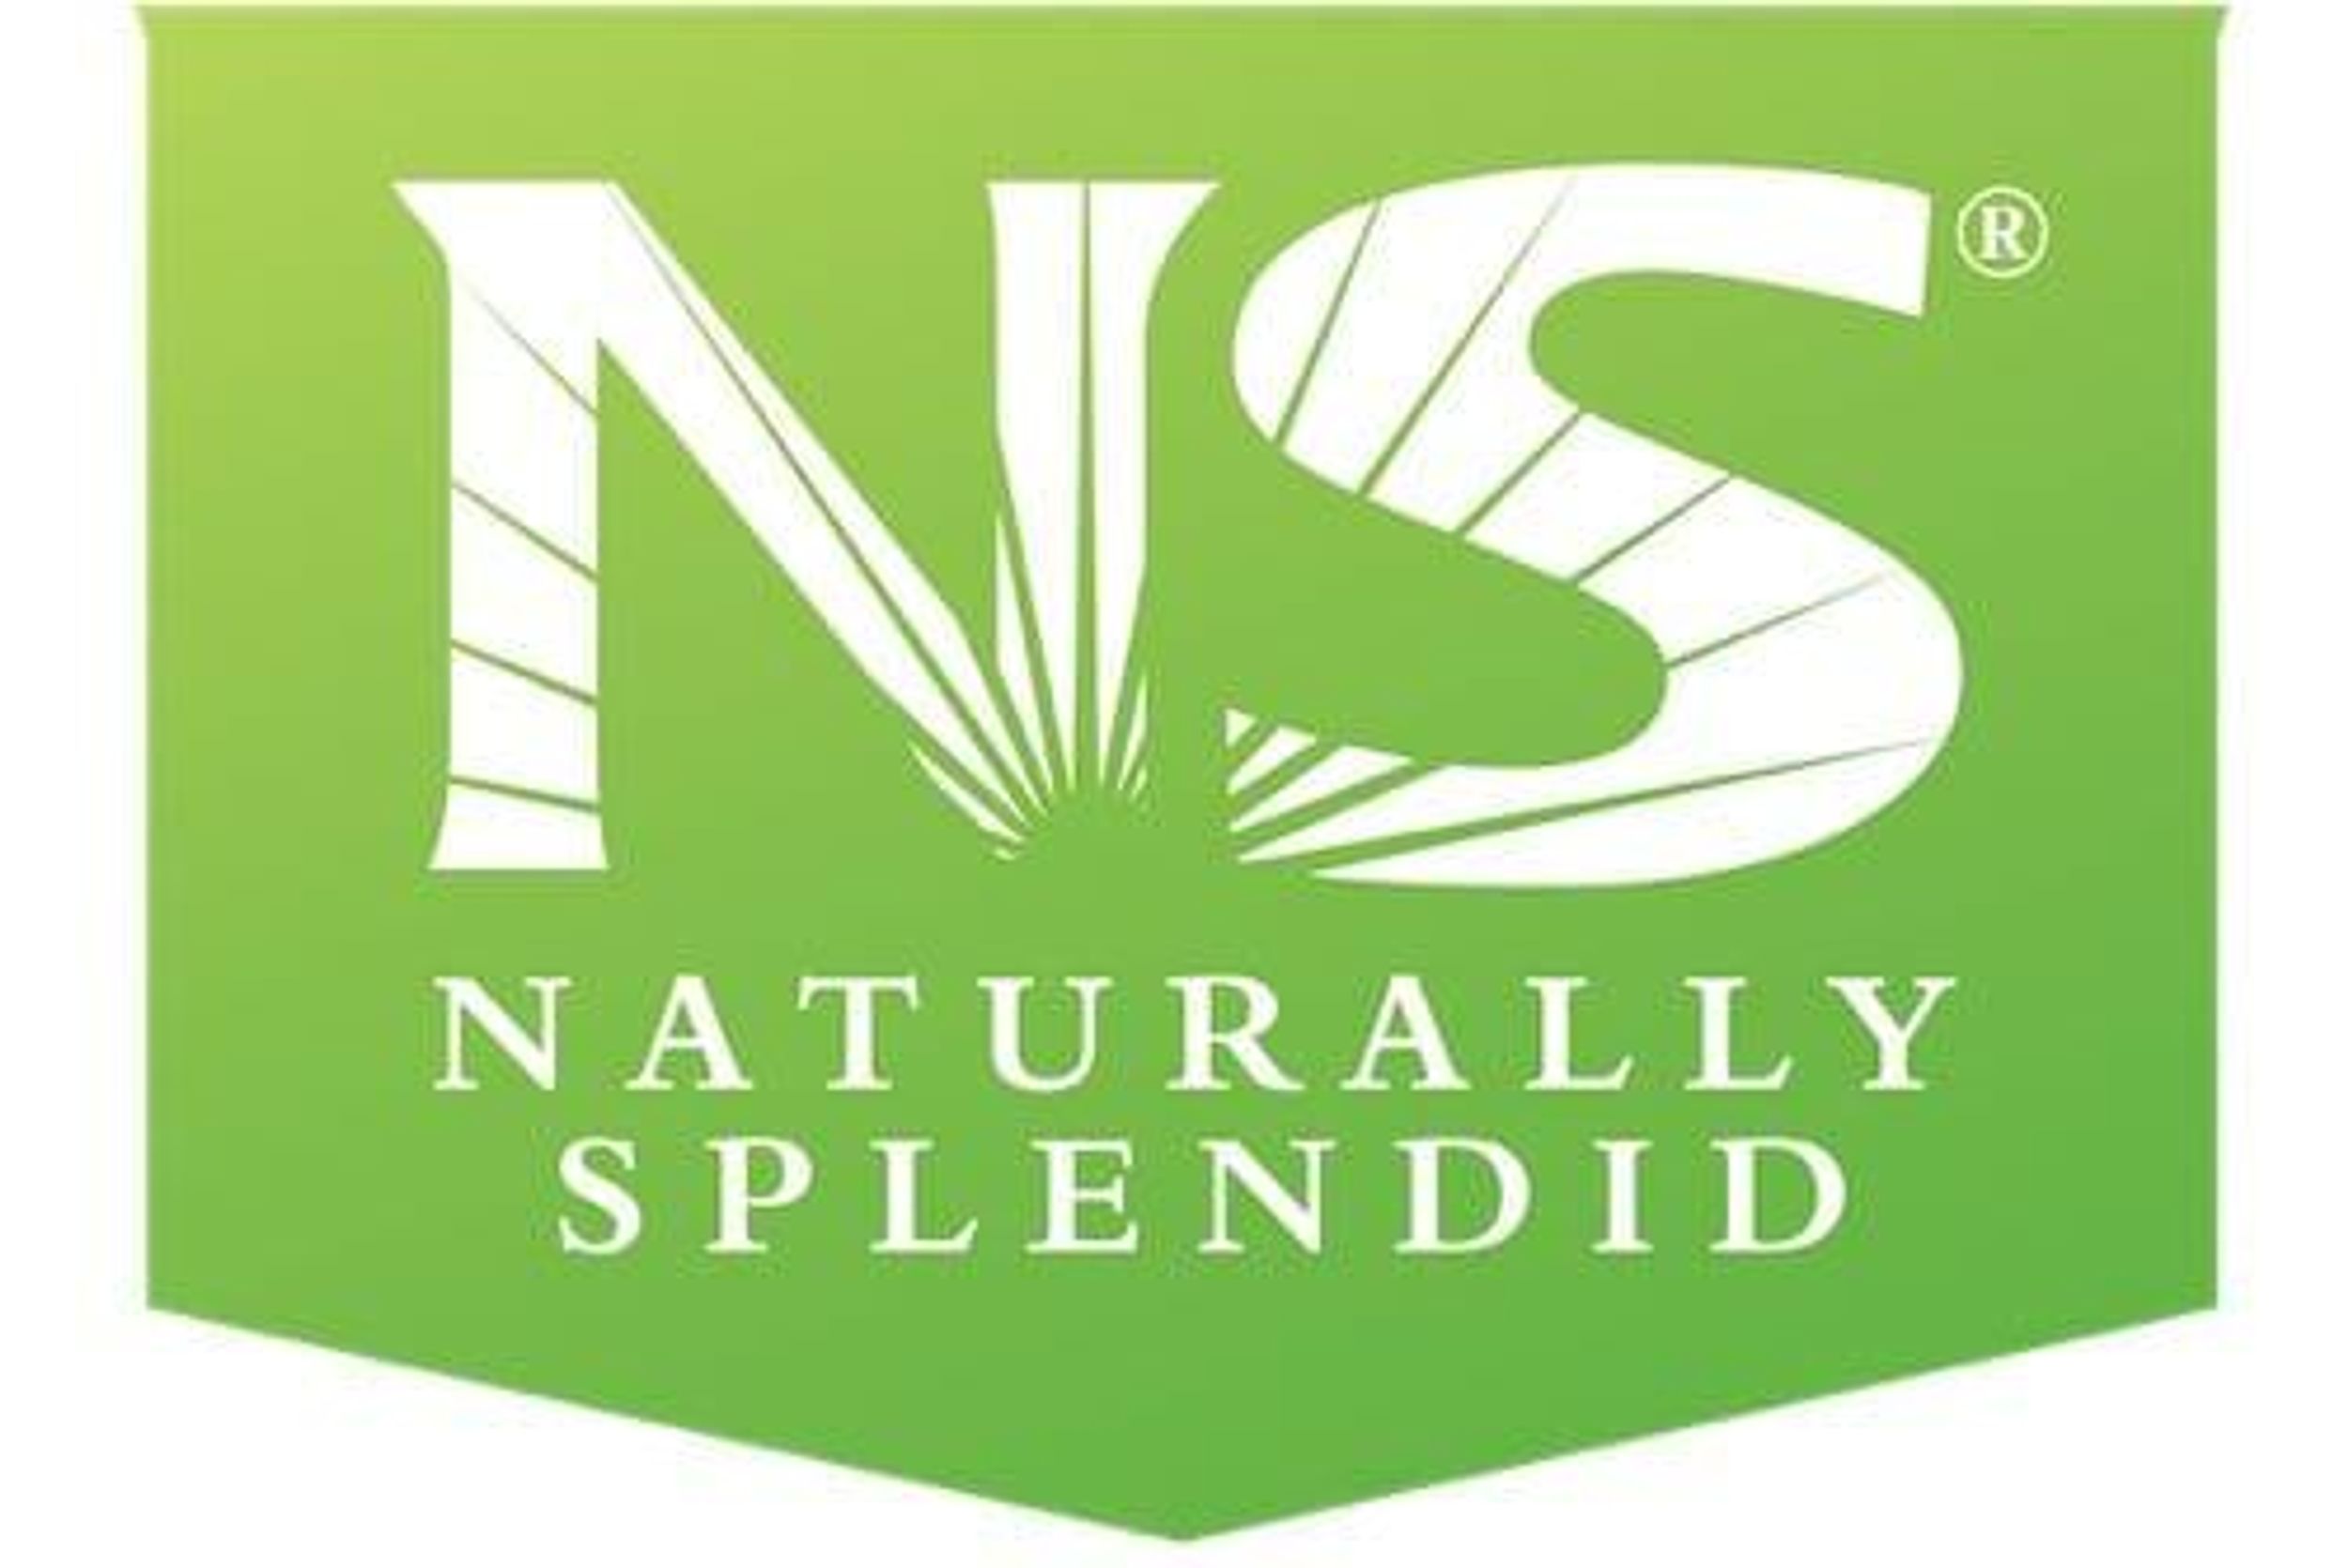 Naturally Splendid Secures Rights to Plantein Trademark